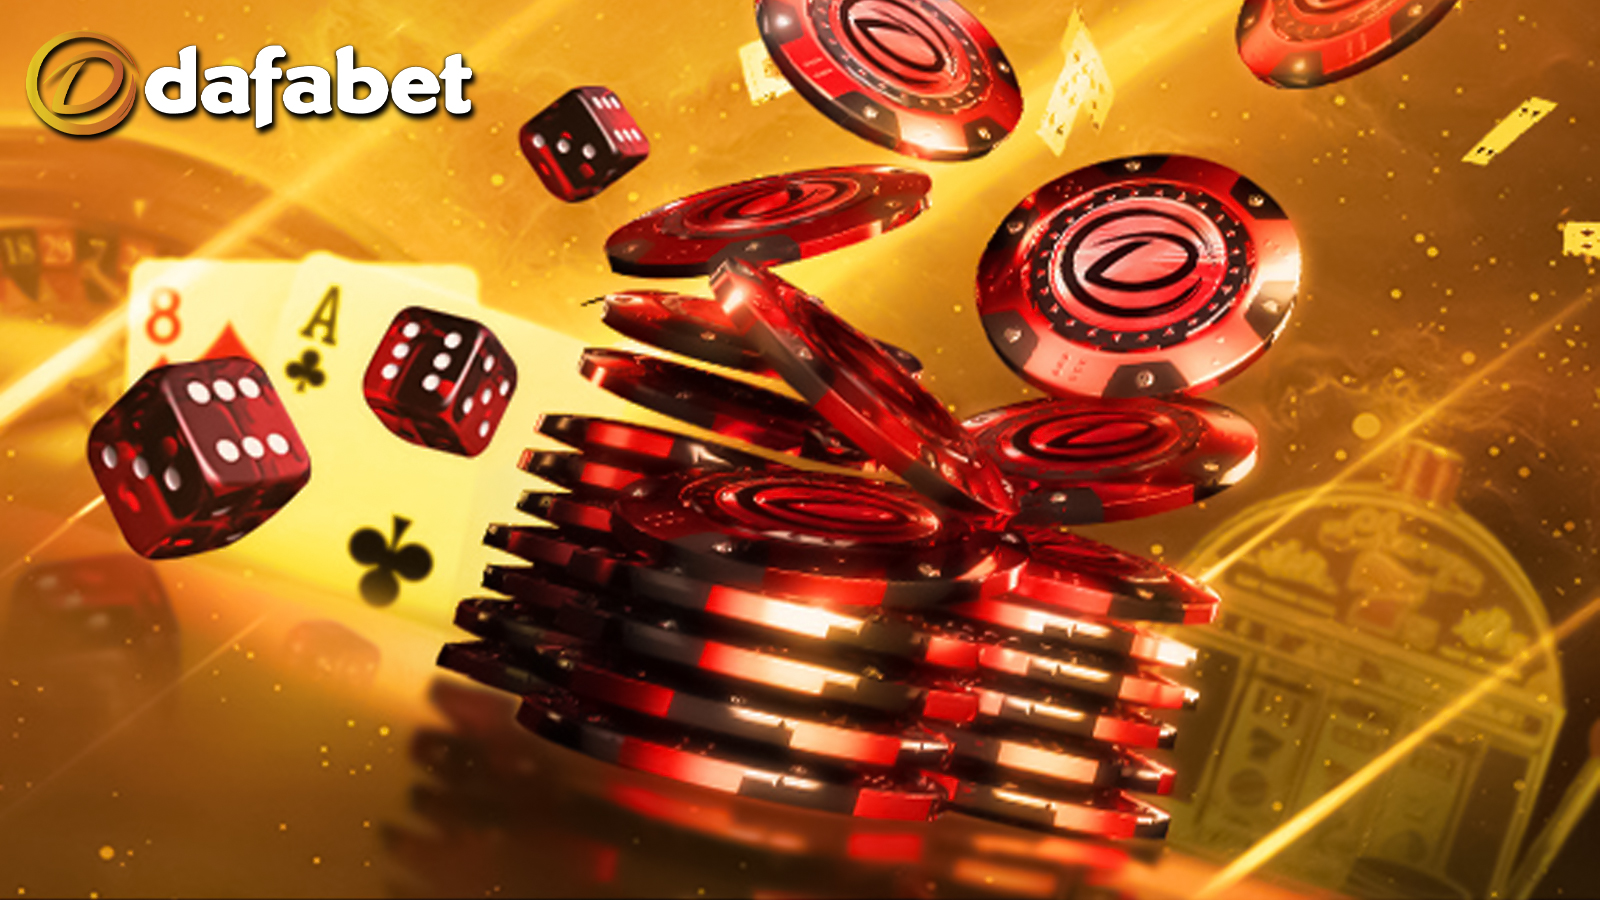 Play one of the most popular teble games at Dafabet Casino.